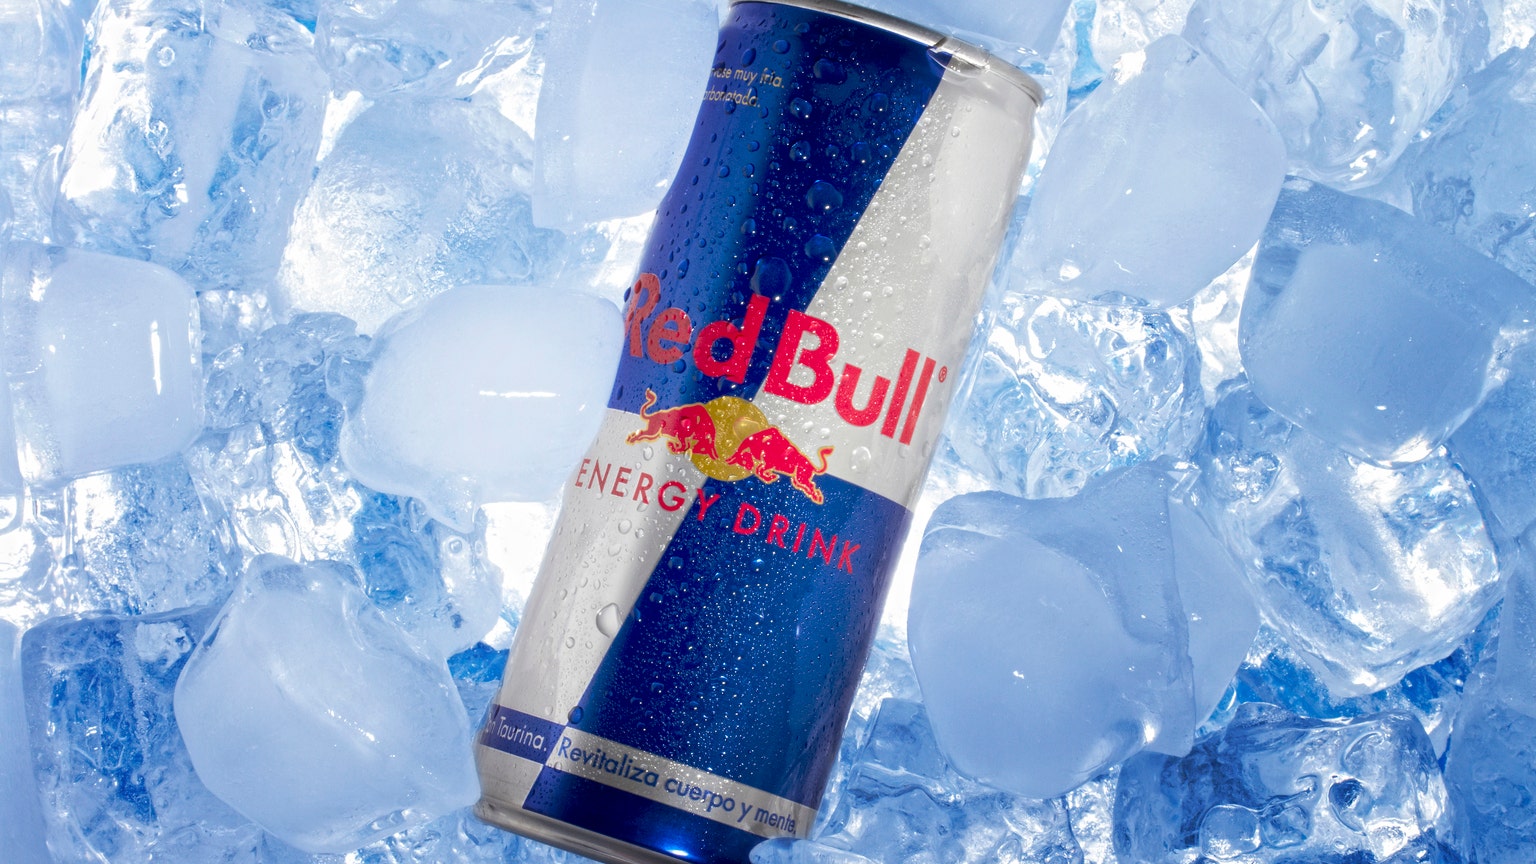 Energy drinks roundup: Red Bull gets raided, market share gains for Monster  and Celsius | Seeking Alpha